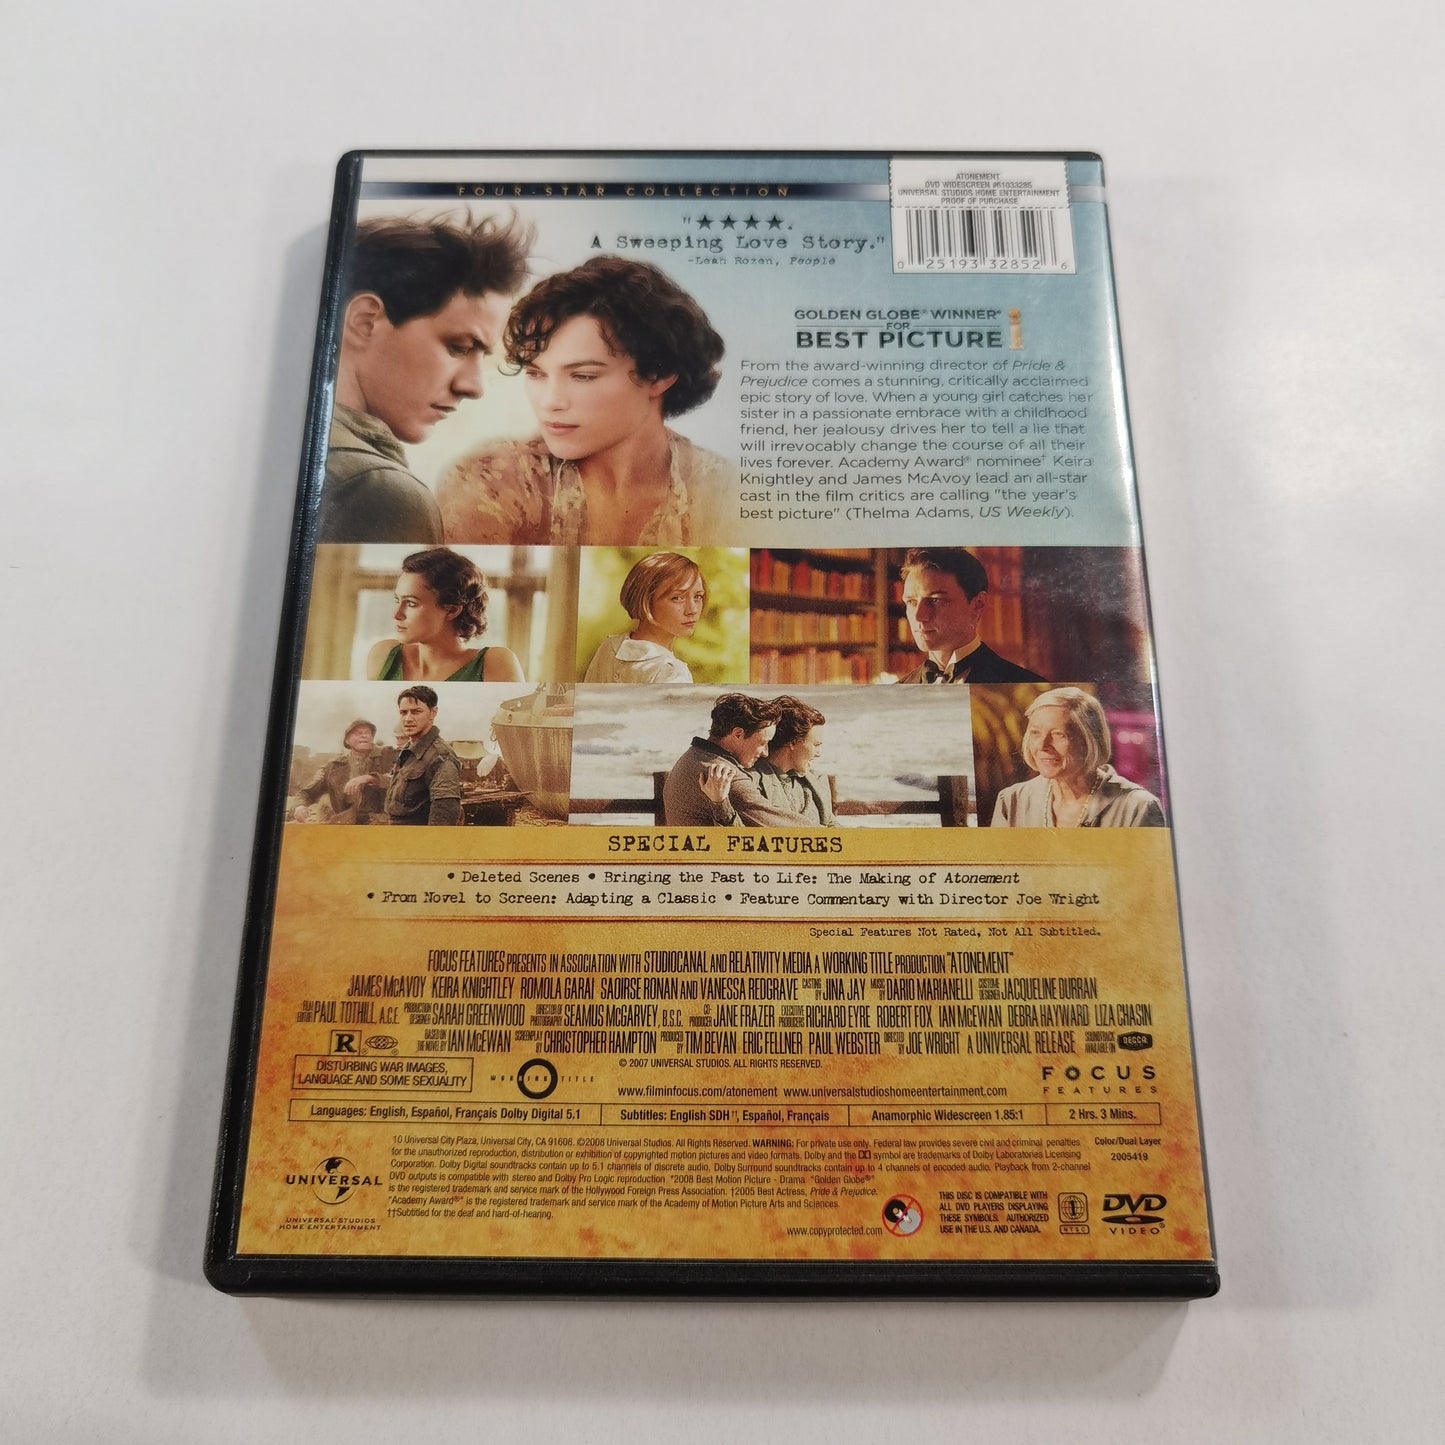 Atonement (2007) - DVD US 2008 Four-Star Collection